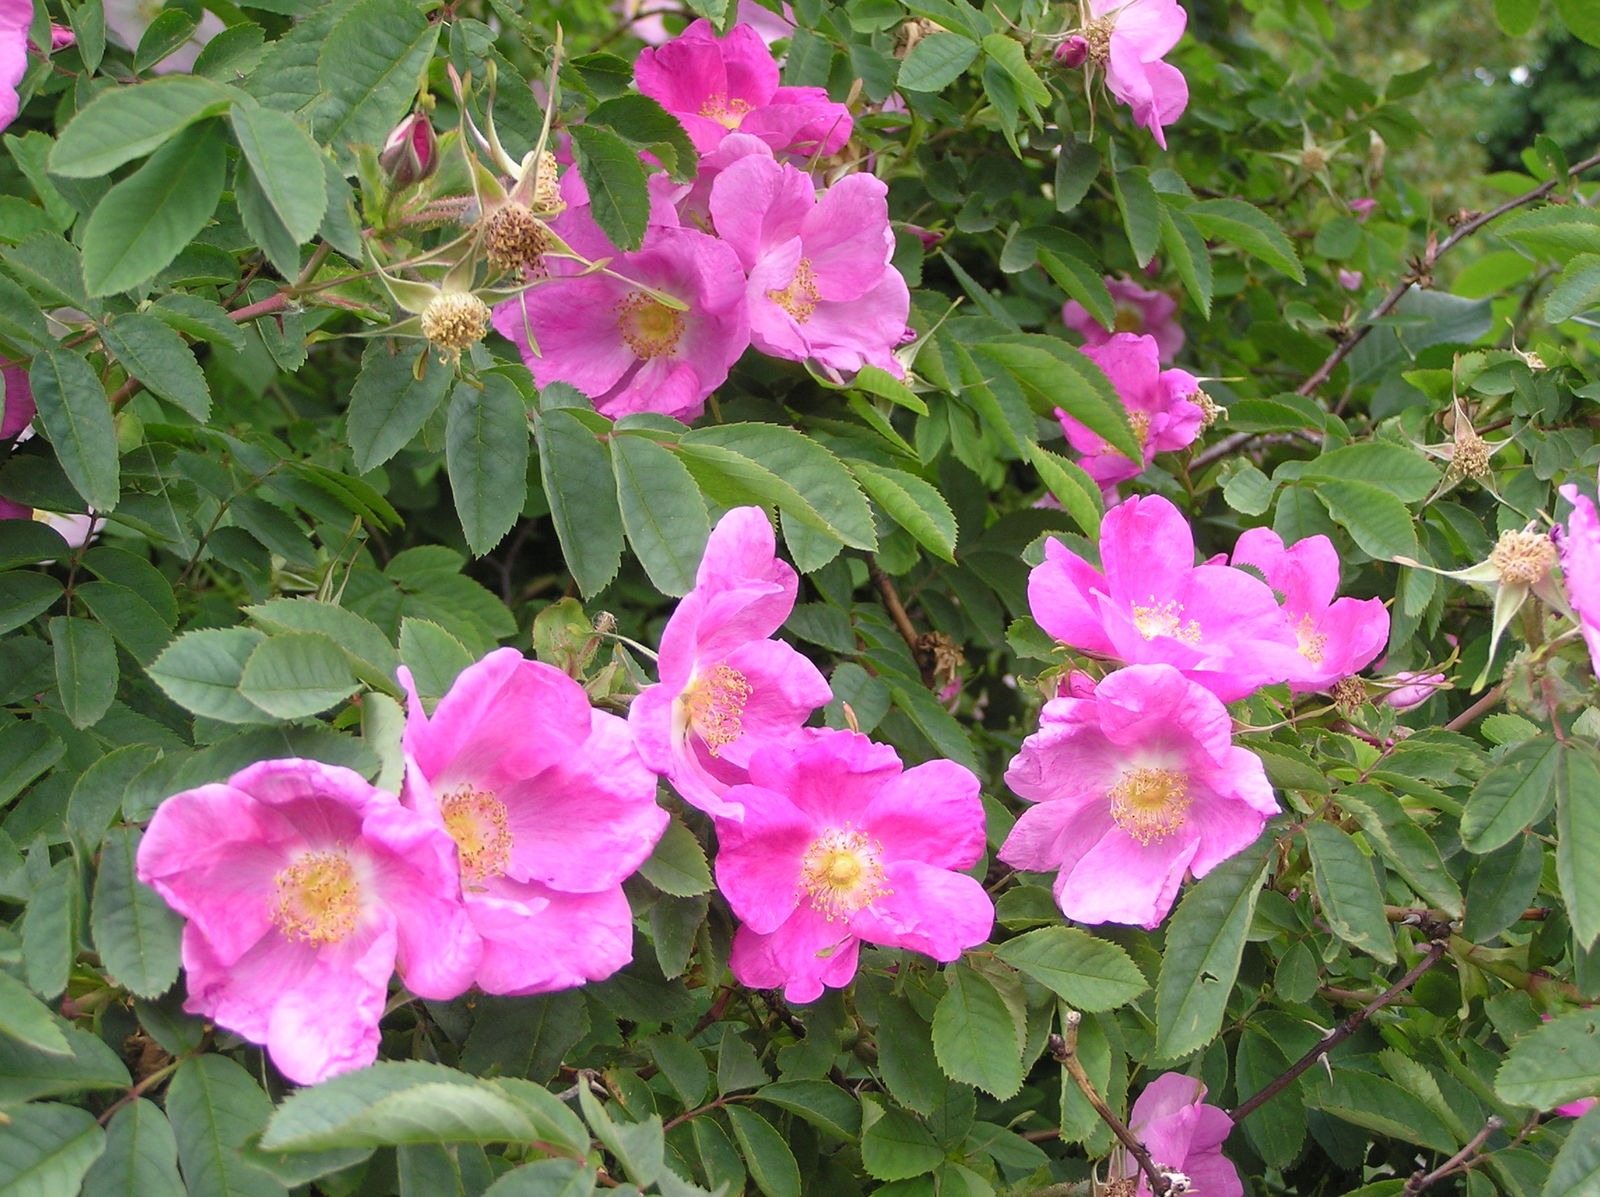 Rosa Tomentosa Sm Plants Of The World Online Kew Science